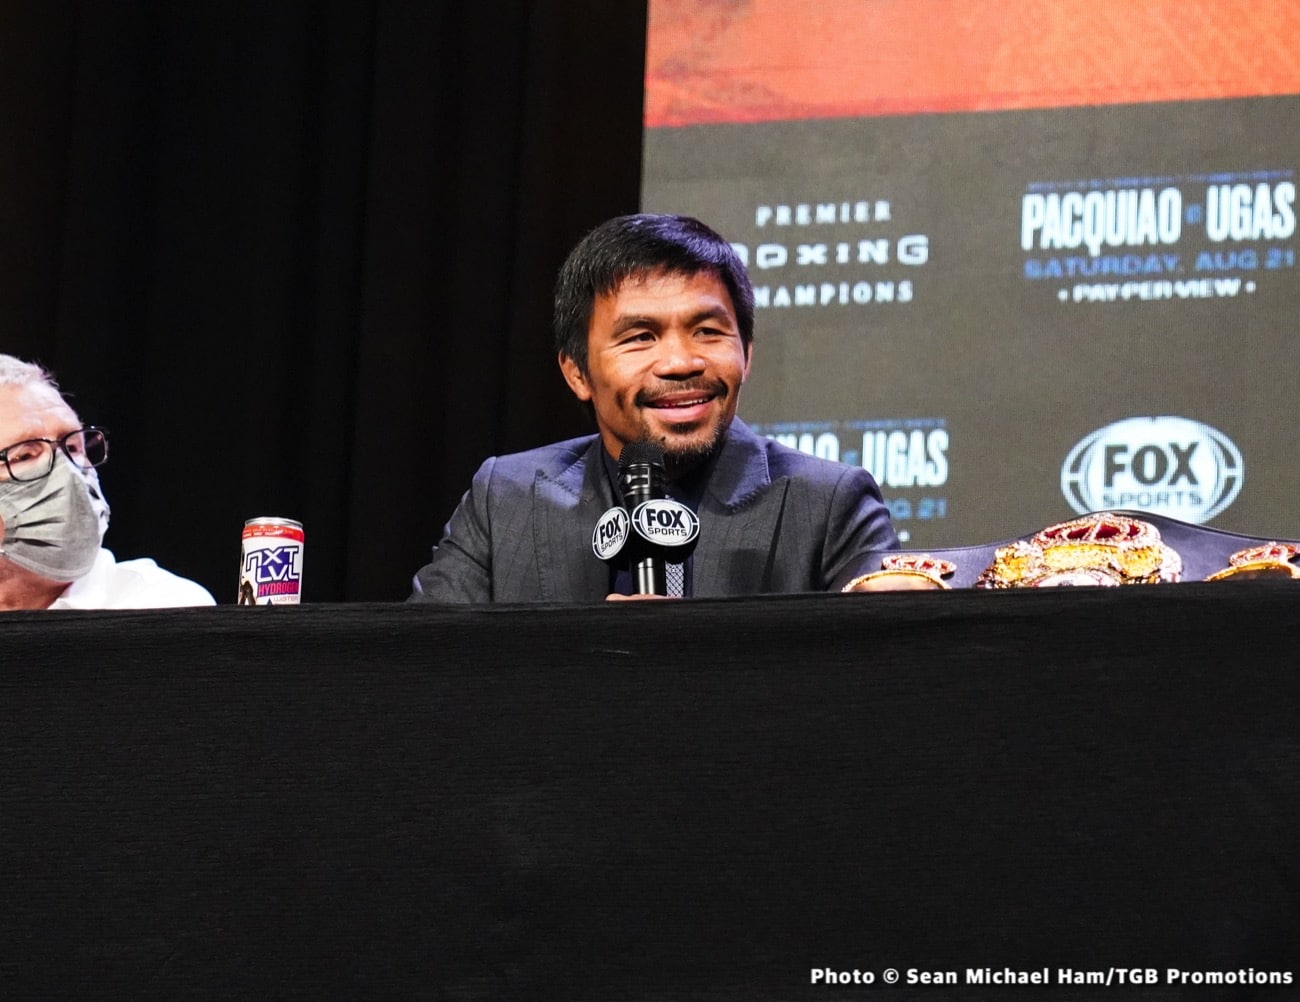 Quotes / Photos: Manny Pacquiao vs. Yordenis Ugas - final press conference